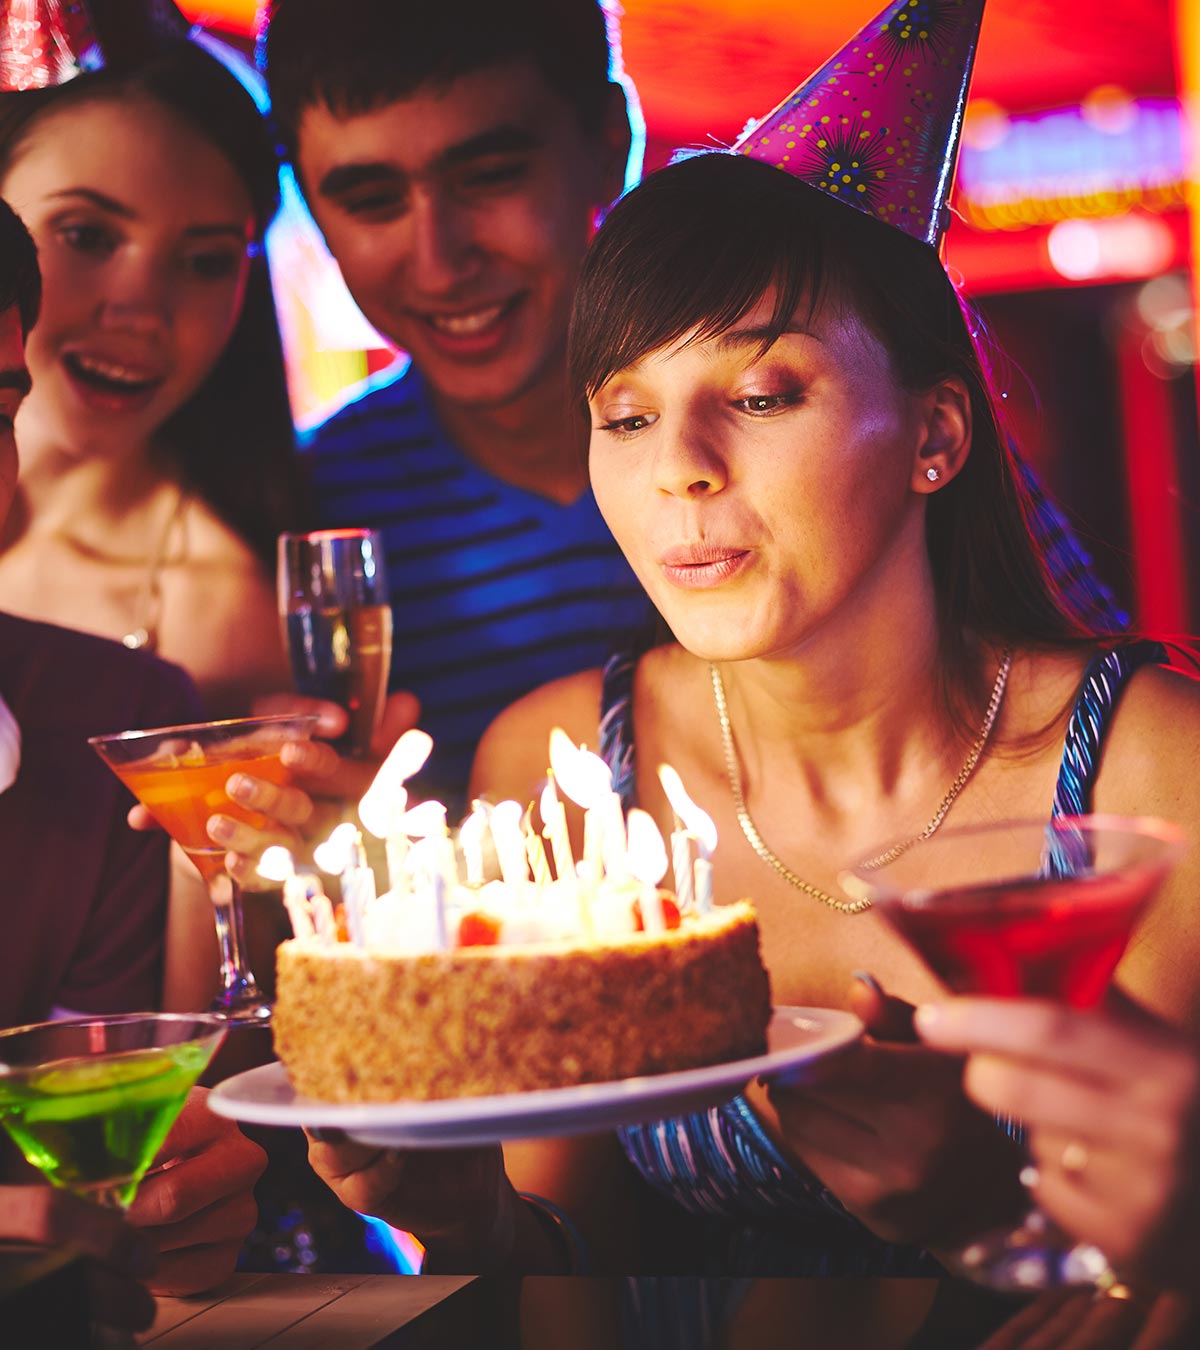 11 Cool Teen Birthday Party Ideas And Games